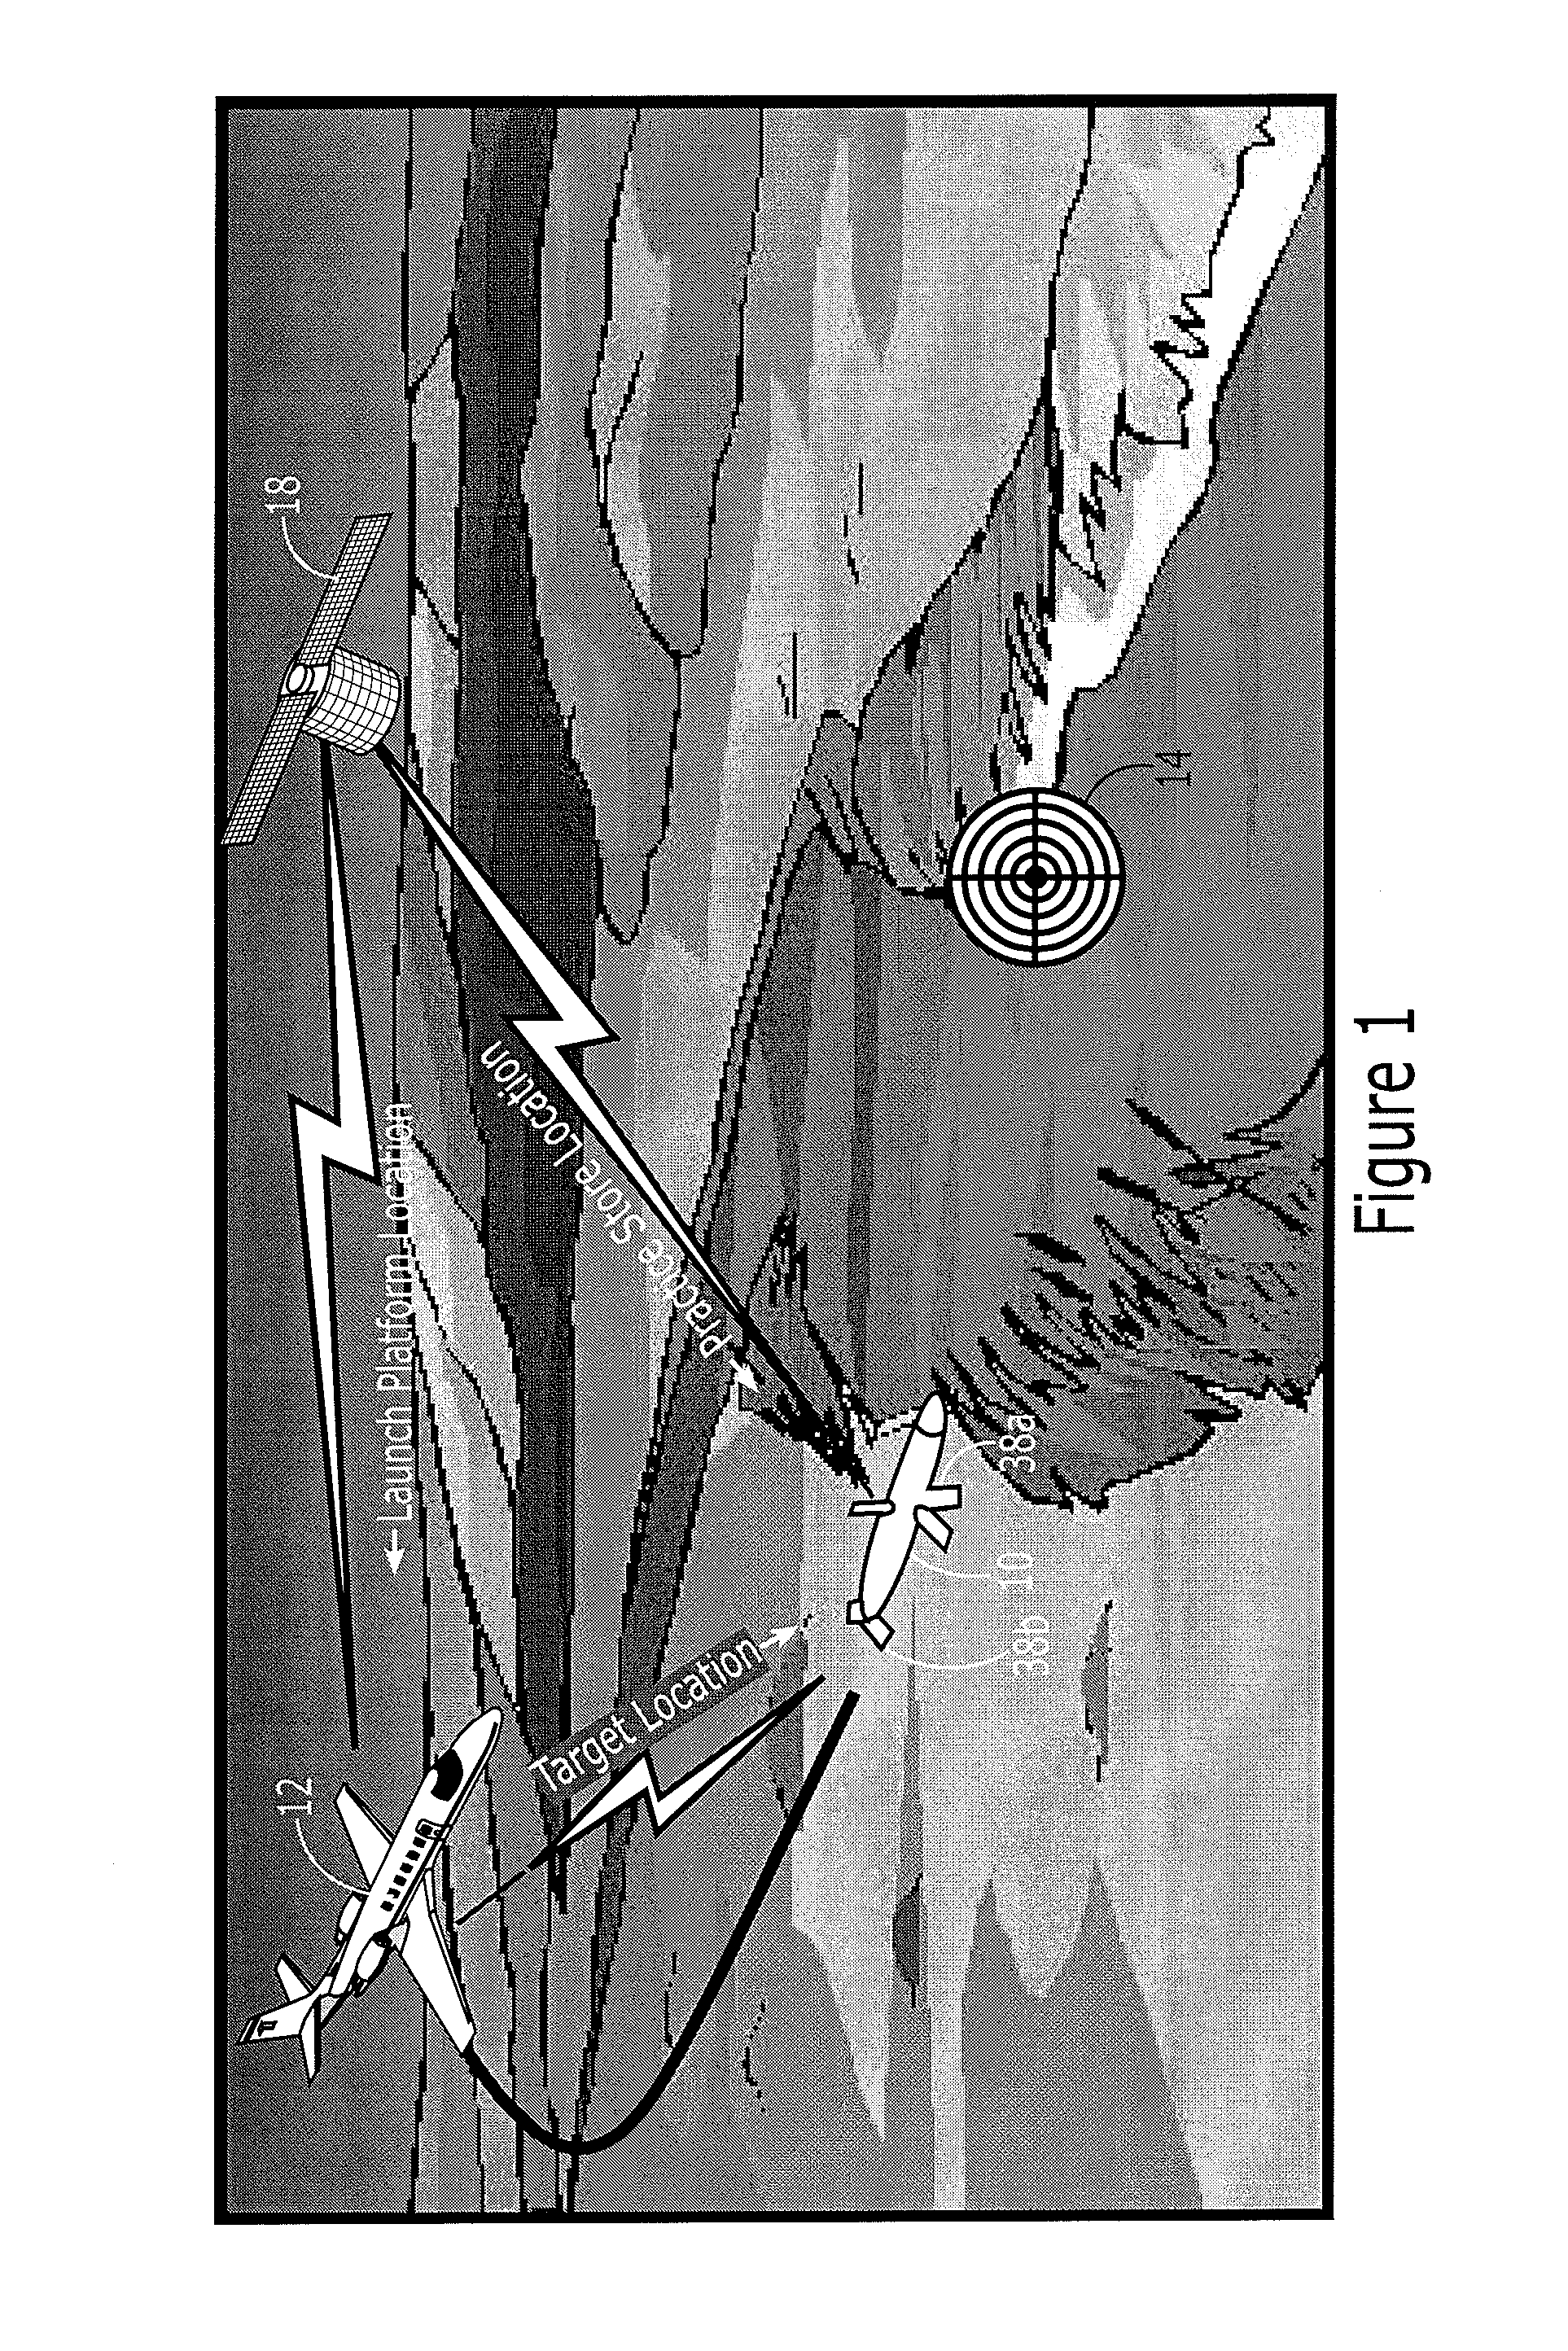 Projectile and associated method for seeking a target identified by laser designation